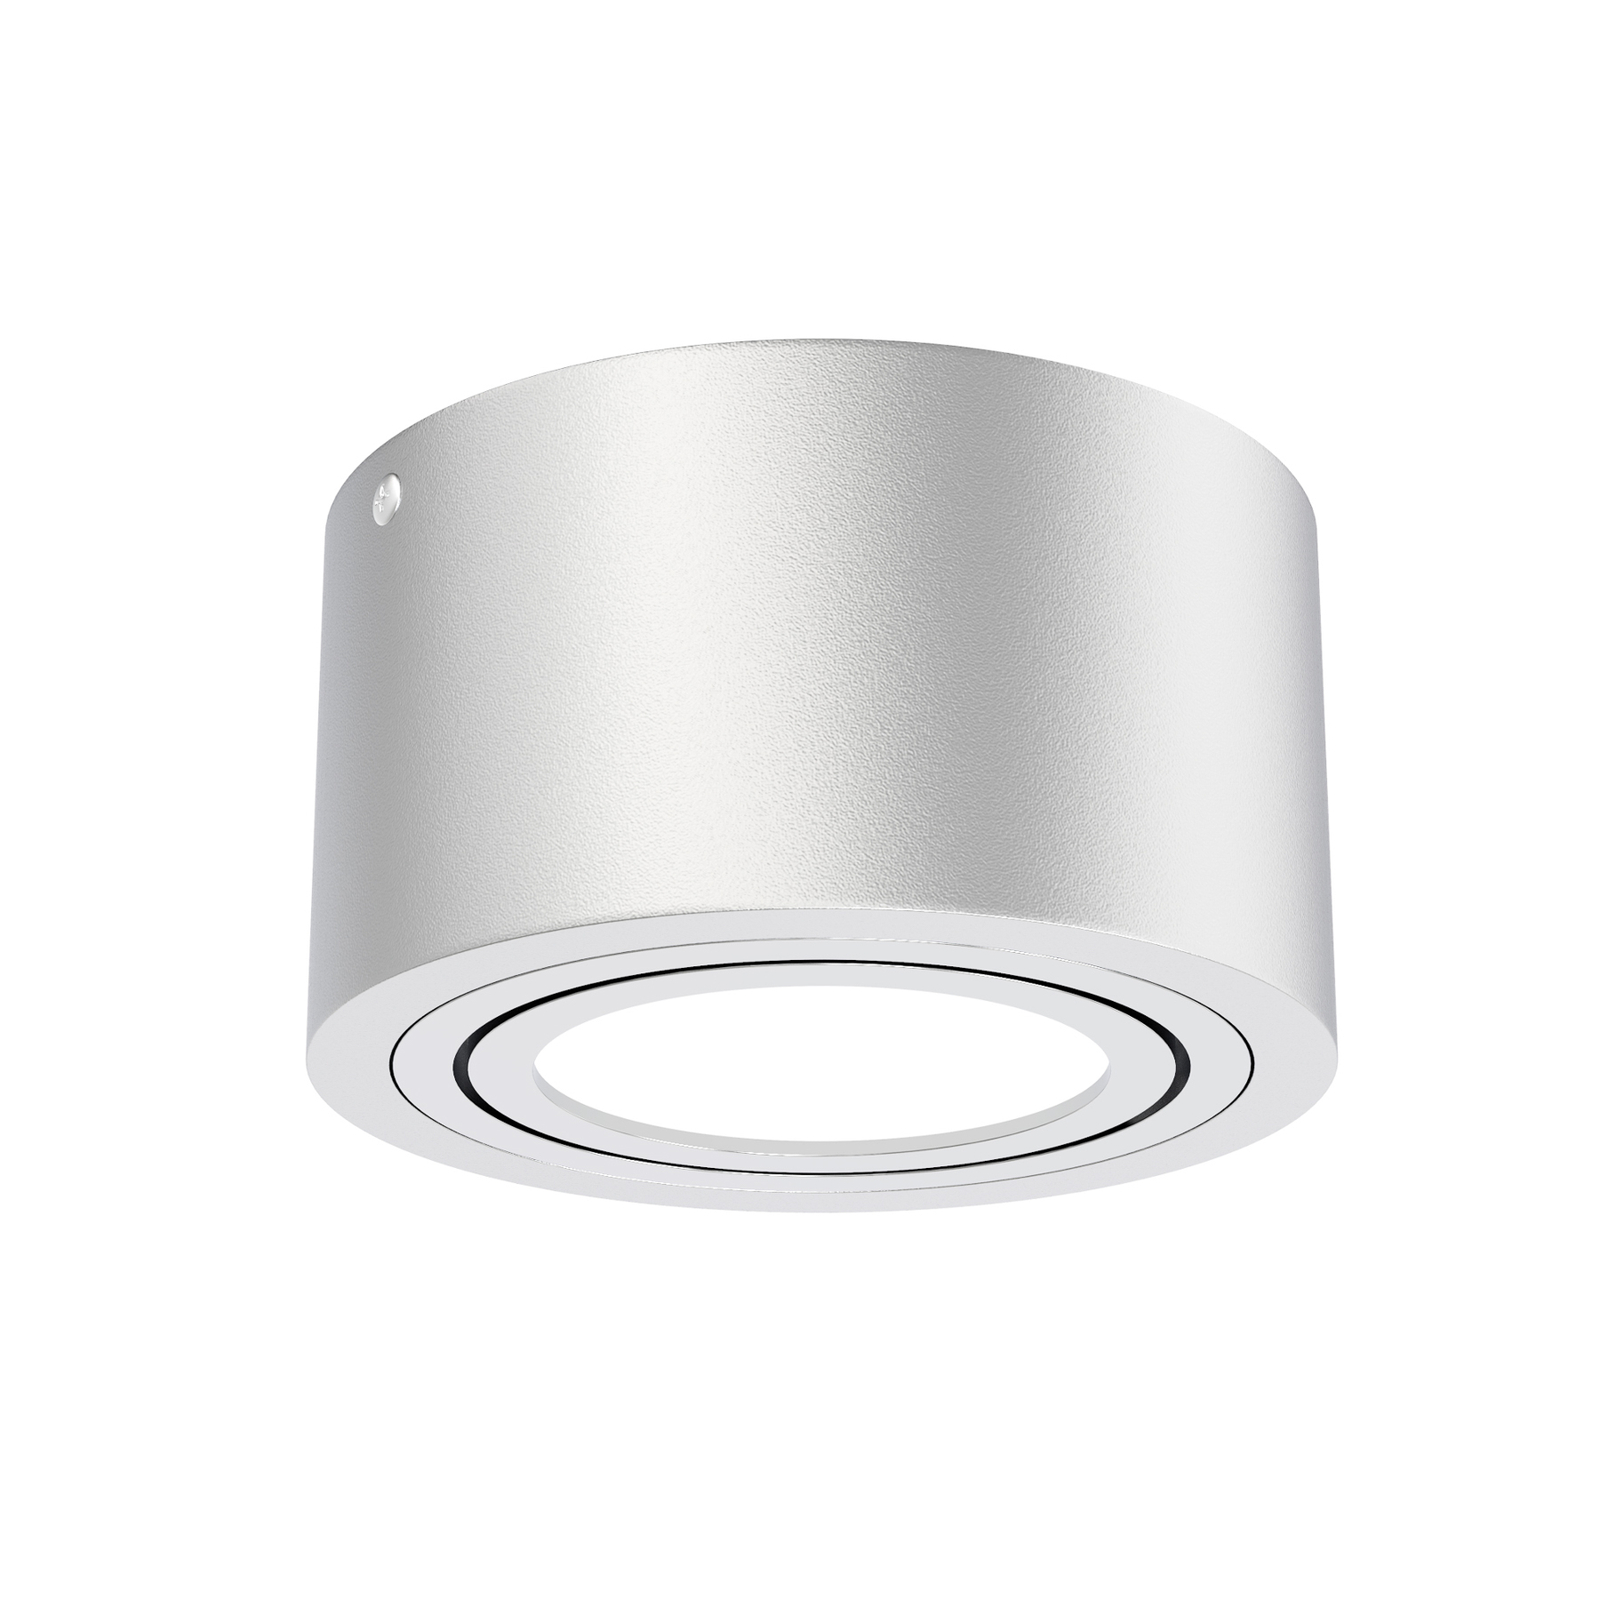 LED downlight Tubes, silver-coloured